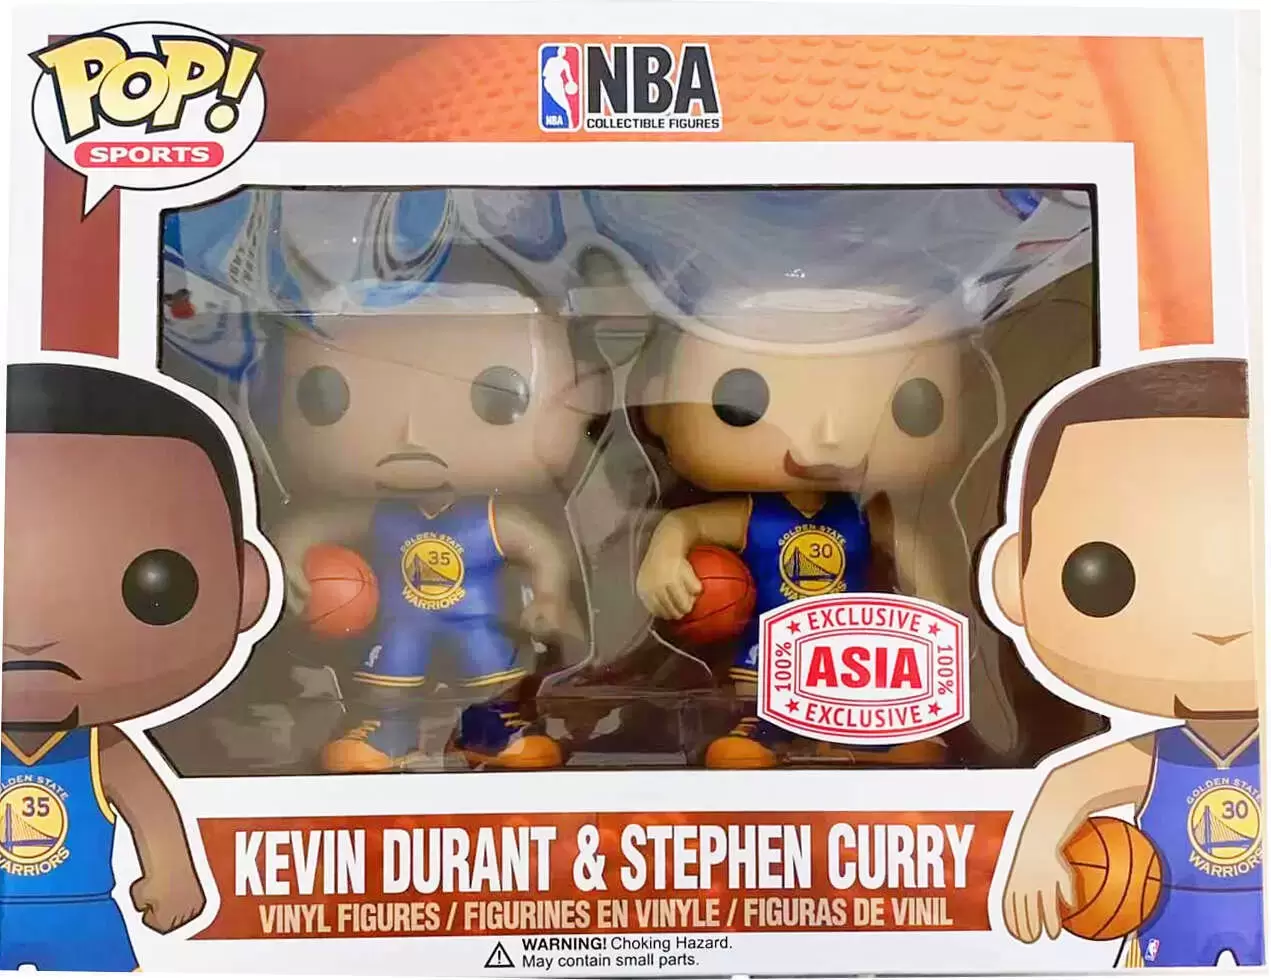 POP! Sports/Basketball - Golden State Warriors - Kevin Durant & Stephen Curry 2 Pack